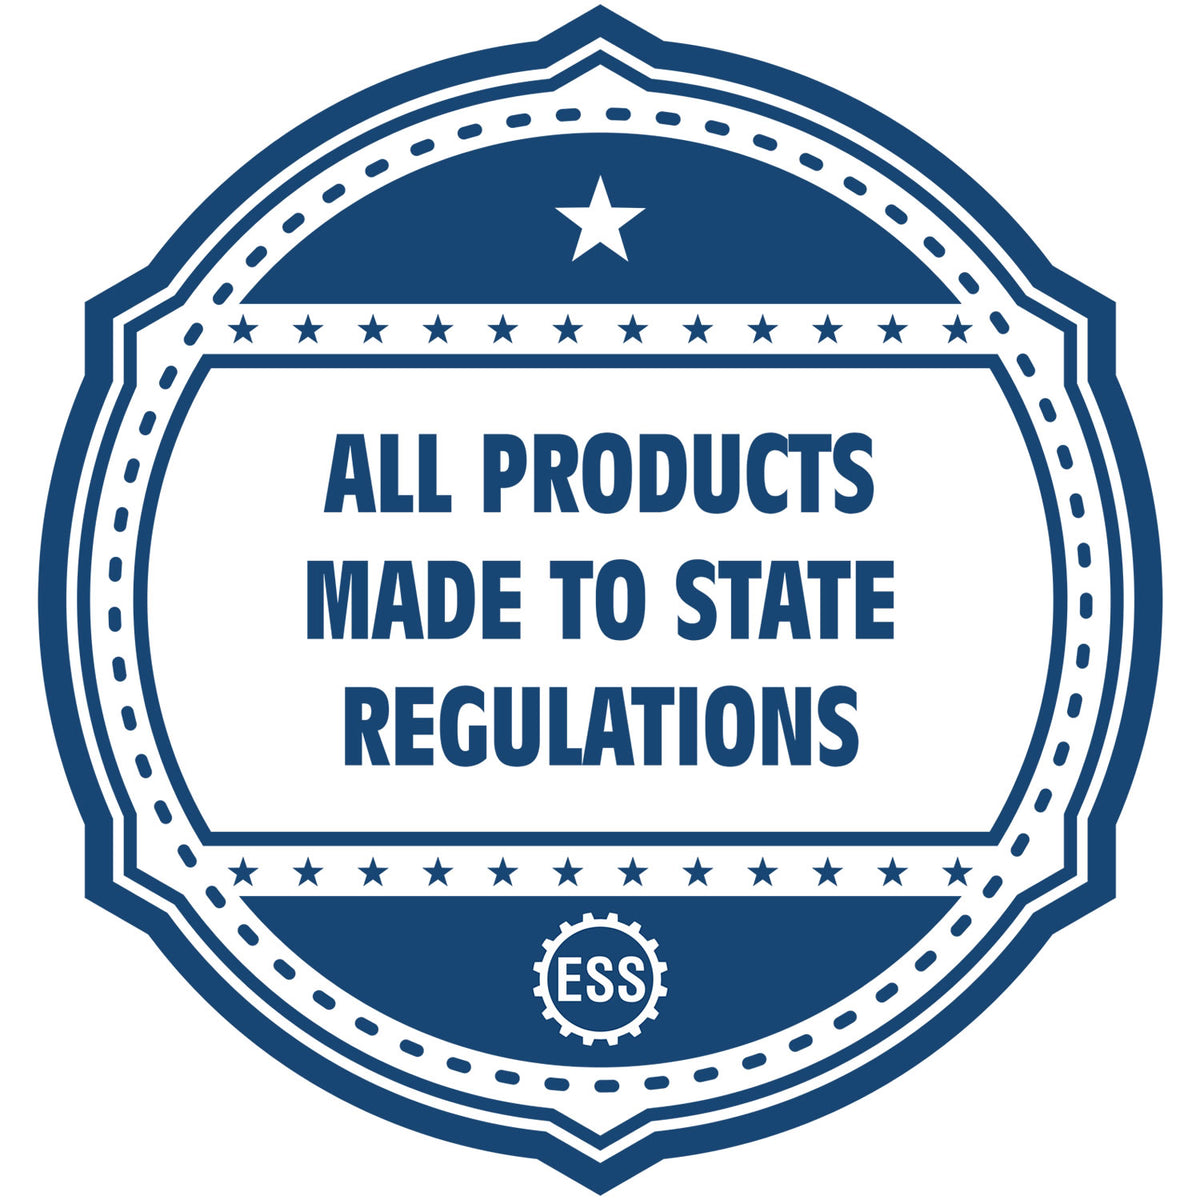 An icon or badge element for the Slim Pre-Inked Rectangular Notary Stamp for Georgia showing that this product is made in compliance with state regulations.